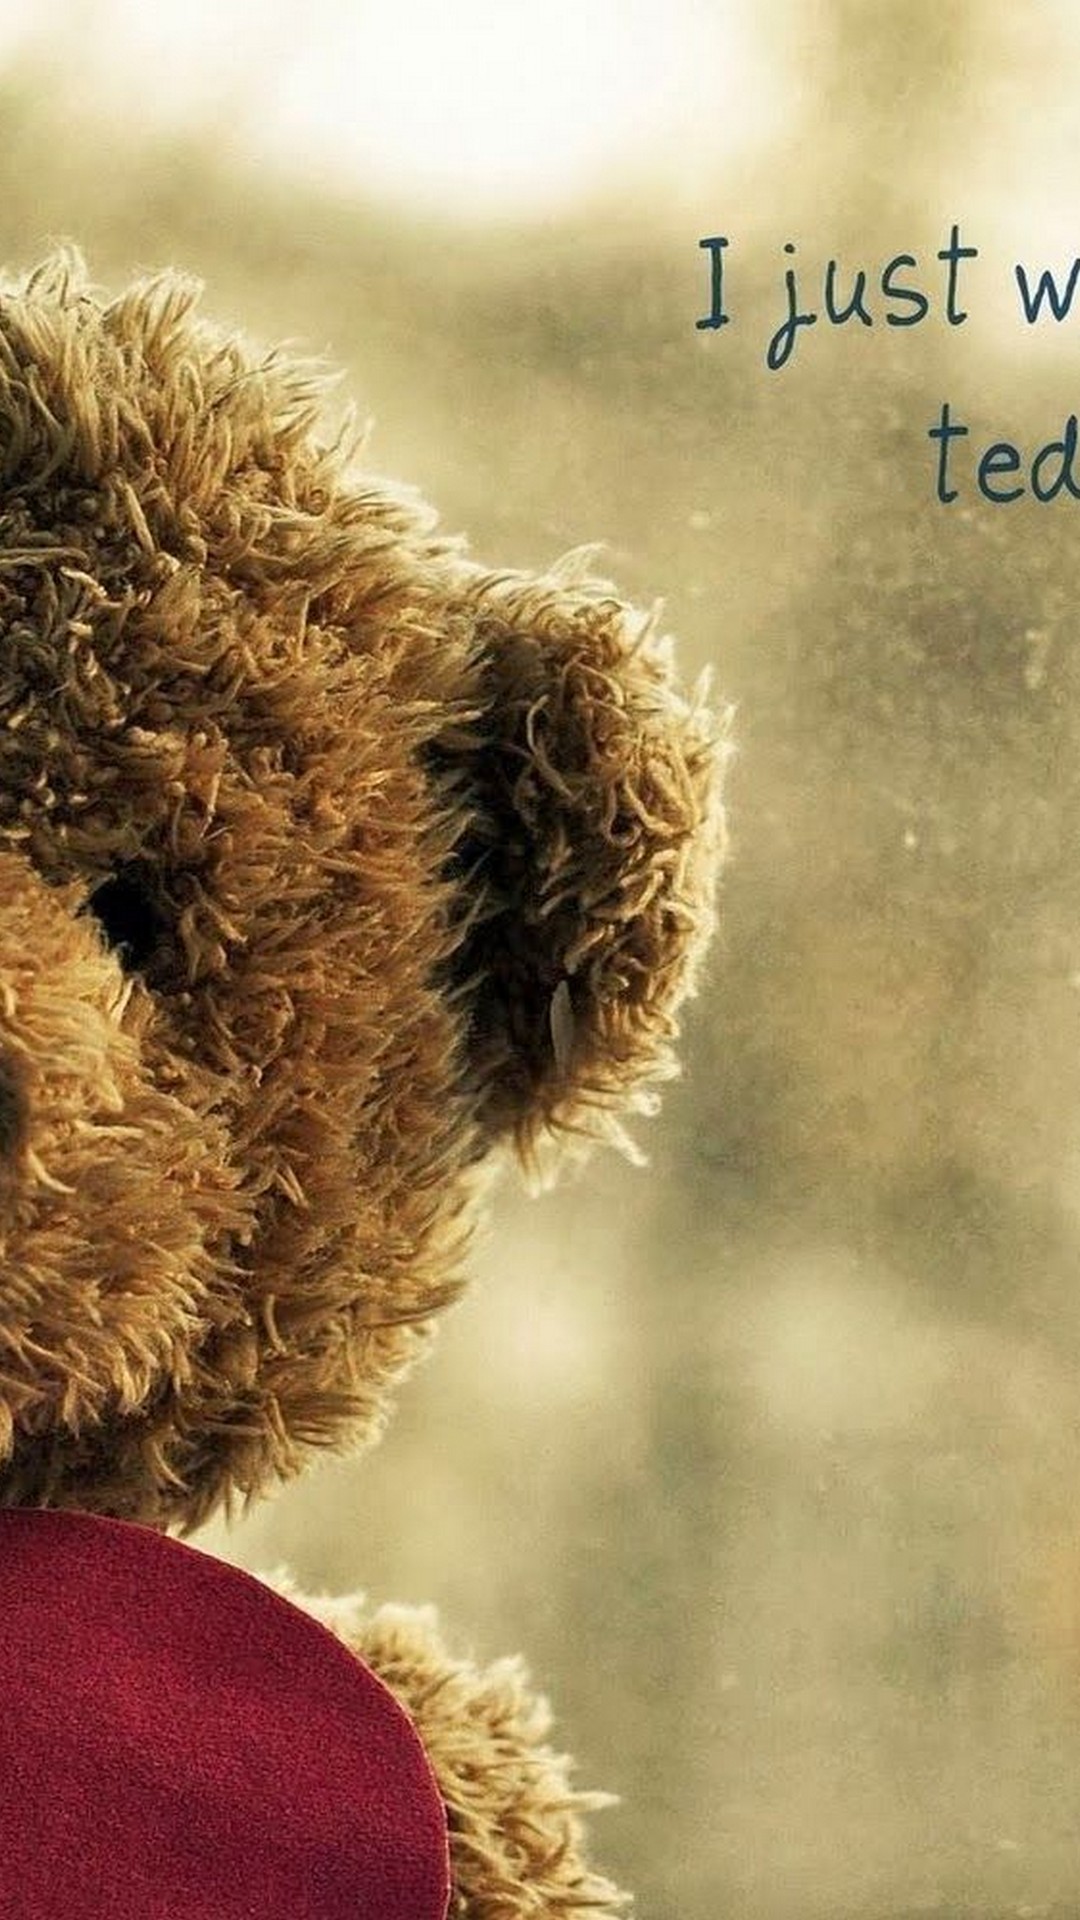 Teddy Bear Giant Wallpaper For iPhone with image resolution 1080x1920 pixel. You can make this wallpaper for your iPhone 5, 6, 7, 8, X backgrounds, Mobile Screensaver, or iPad Lock Screen